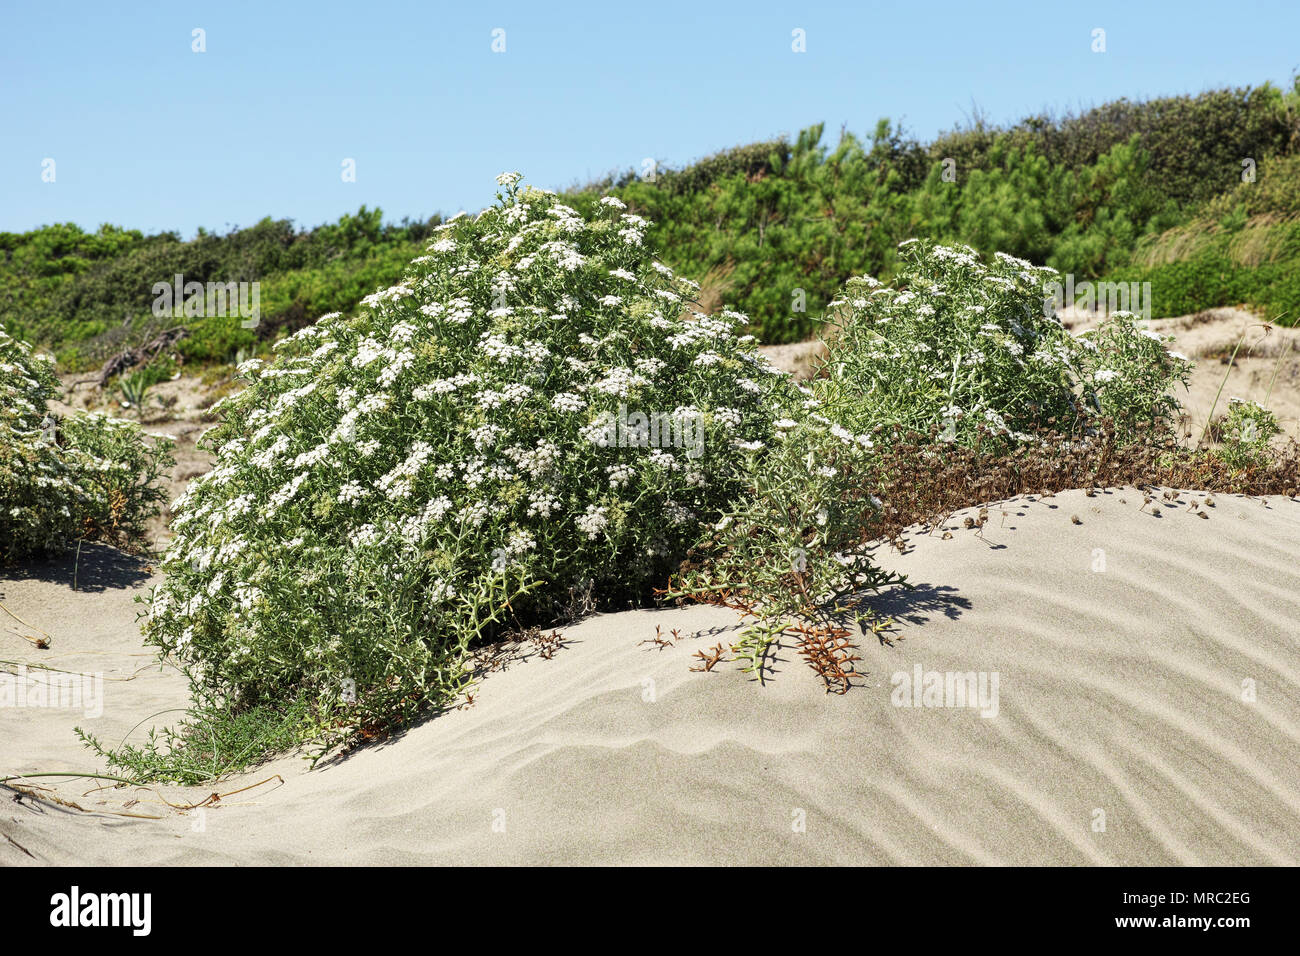 a plant in blooming of prickly samphire or sea fennel, echinophora spinosa Stock Photo